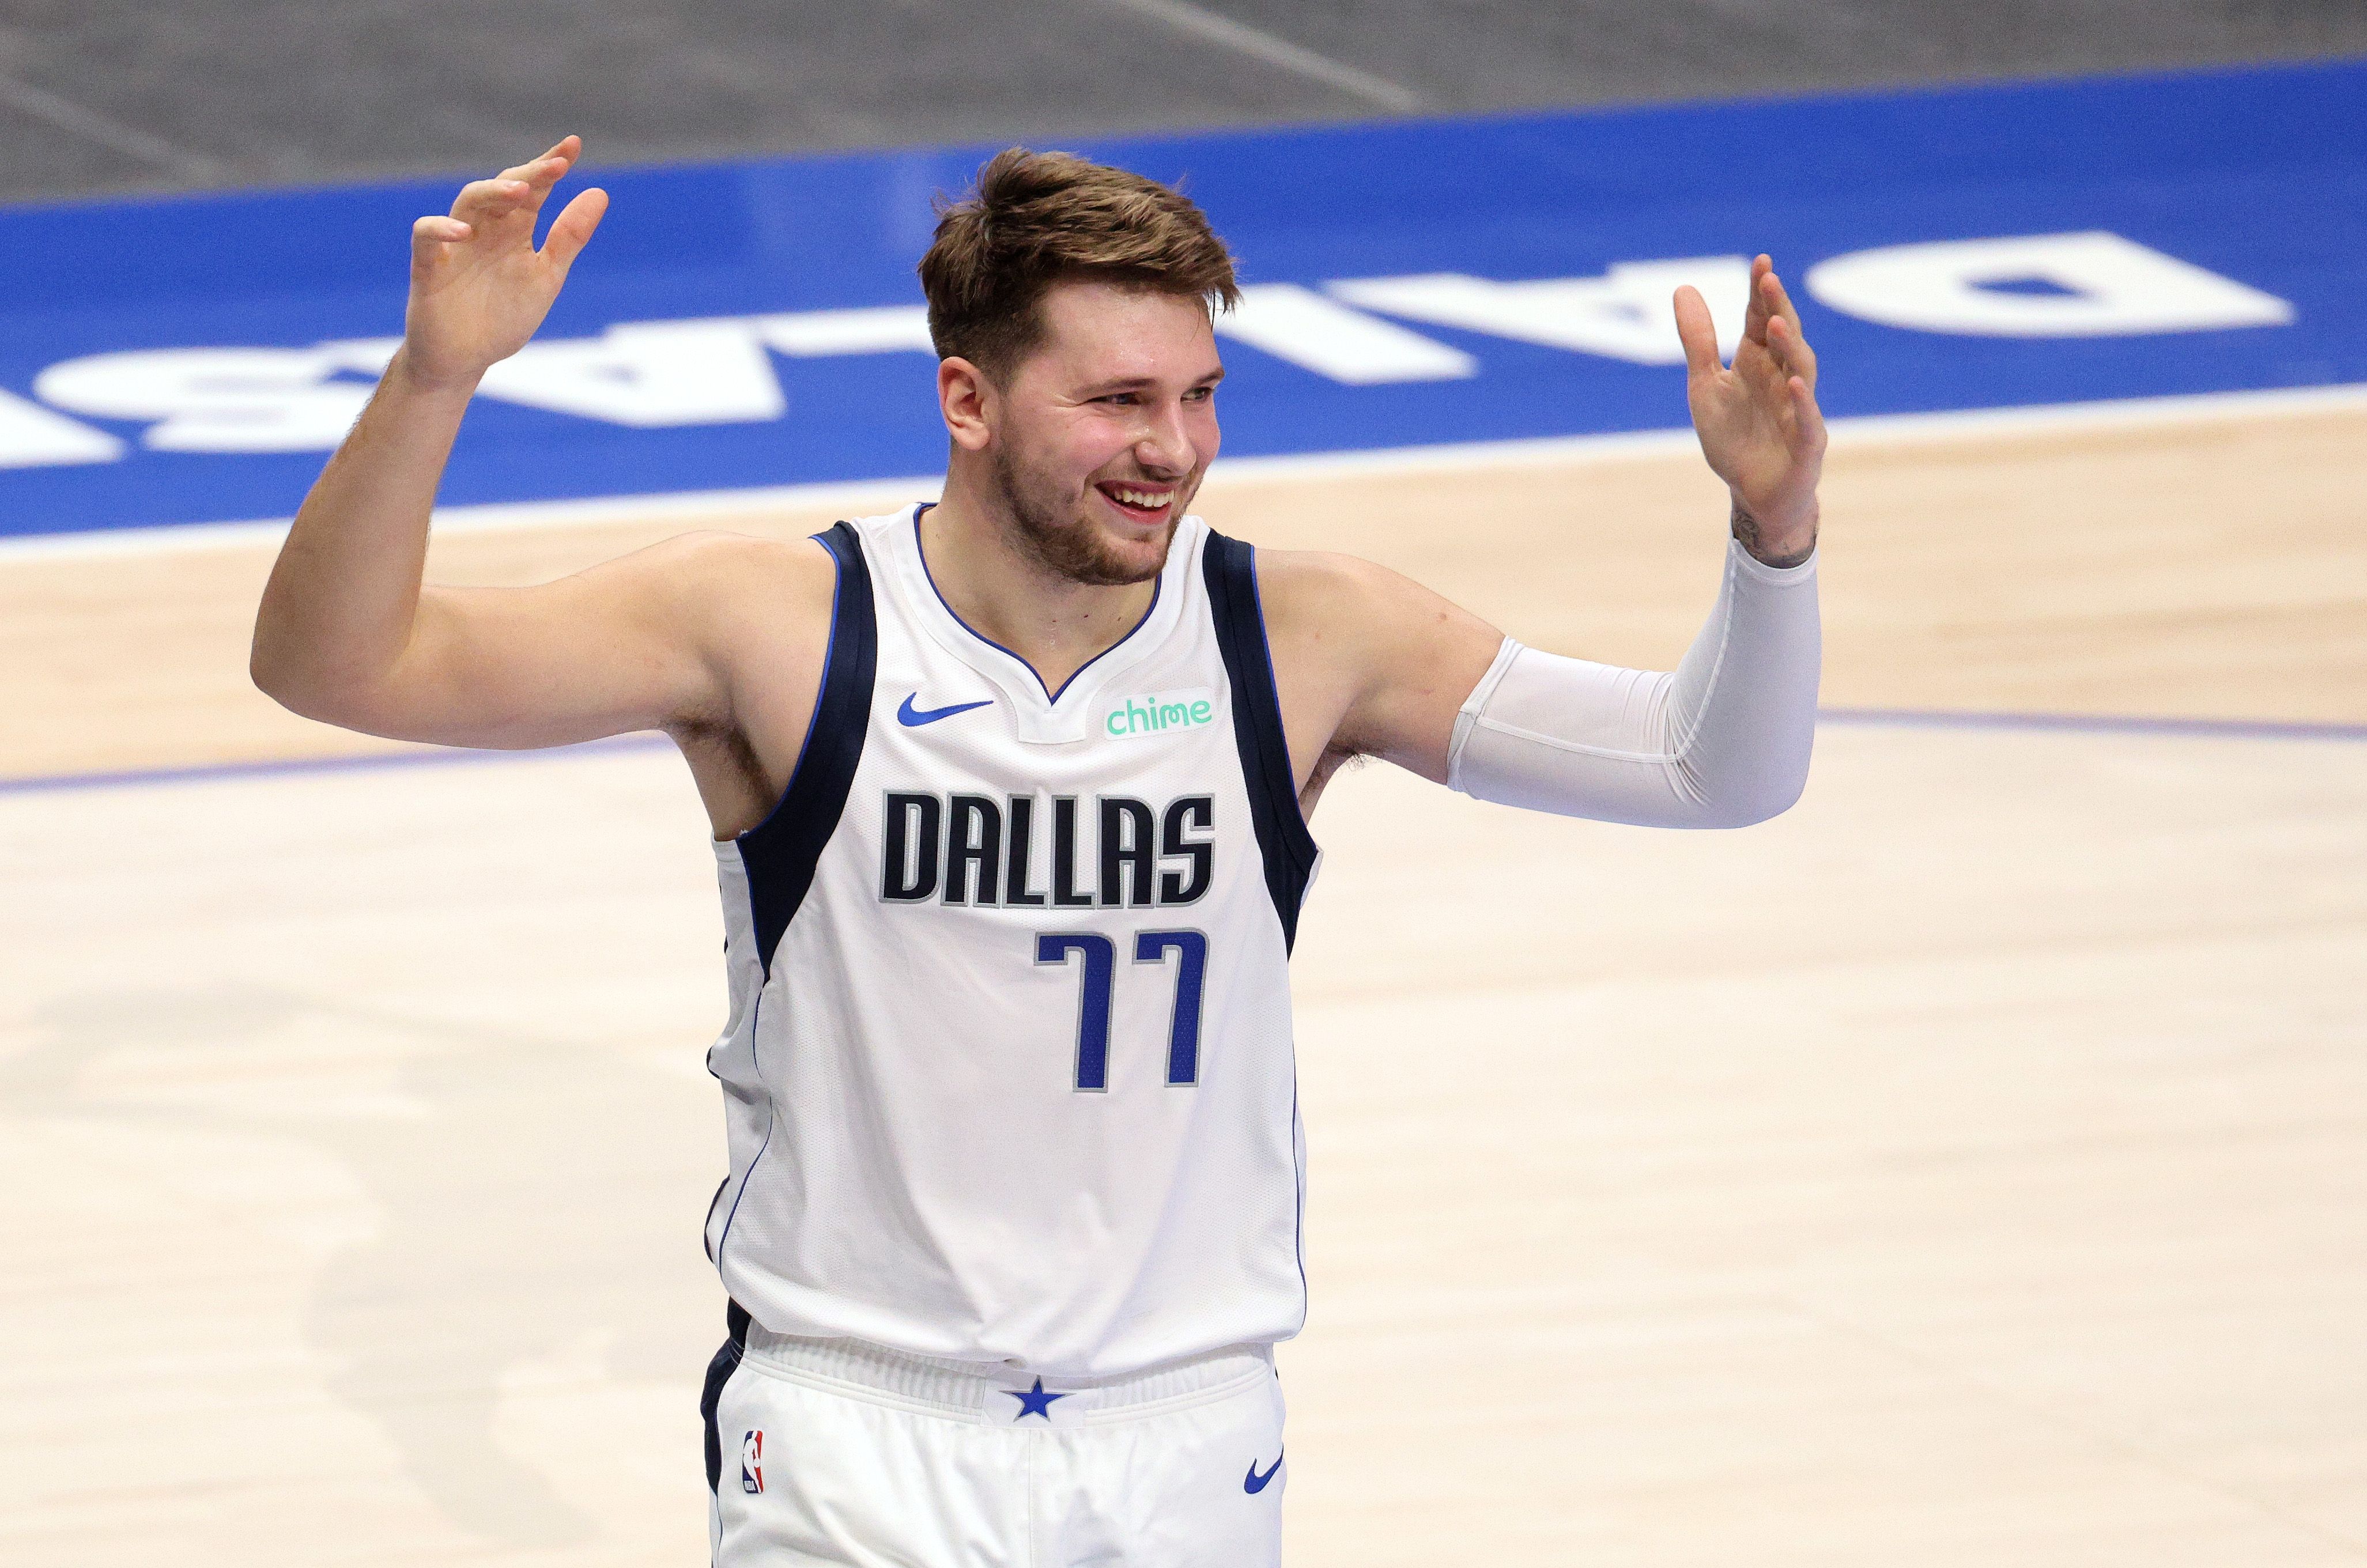 Luka Doncic smiles after receiving a favorable call